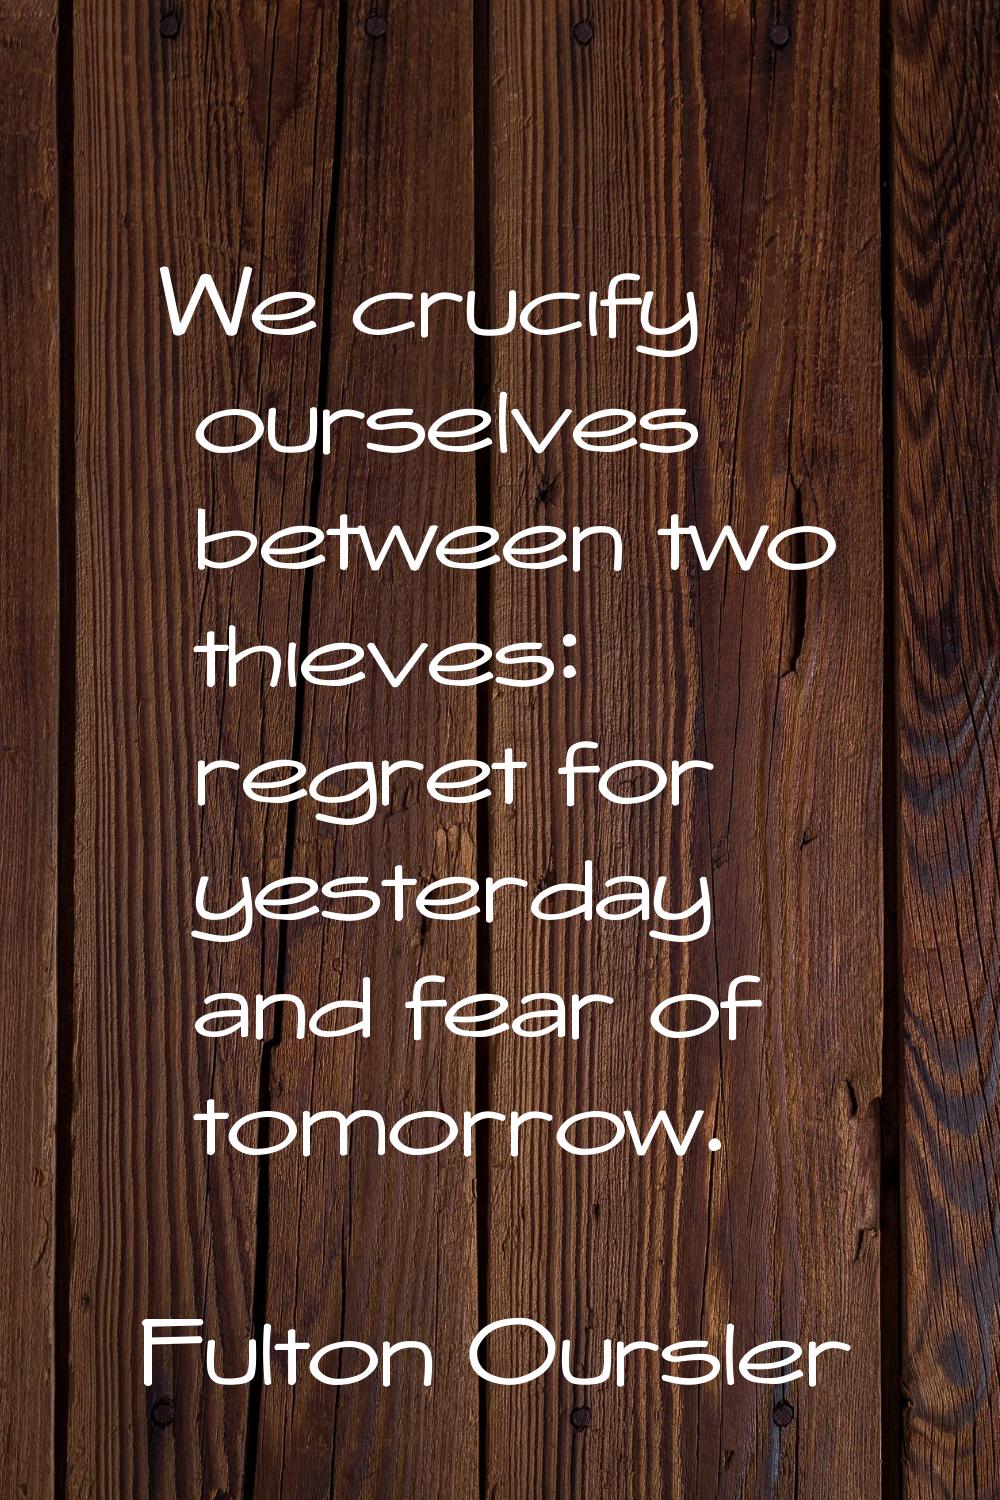 We crucify ourselves between two thieves: regret for yesterday and fear of tomorrow.